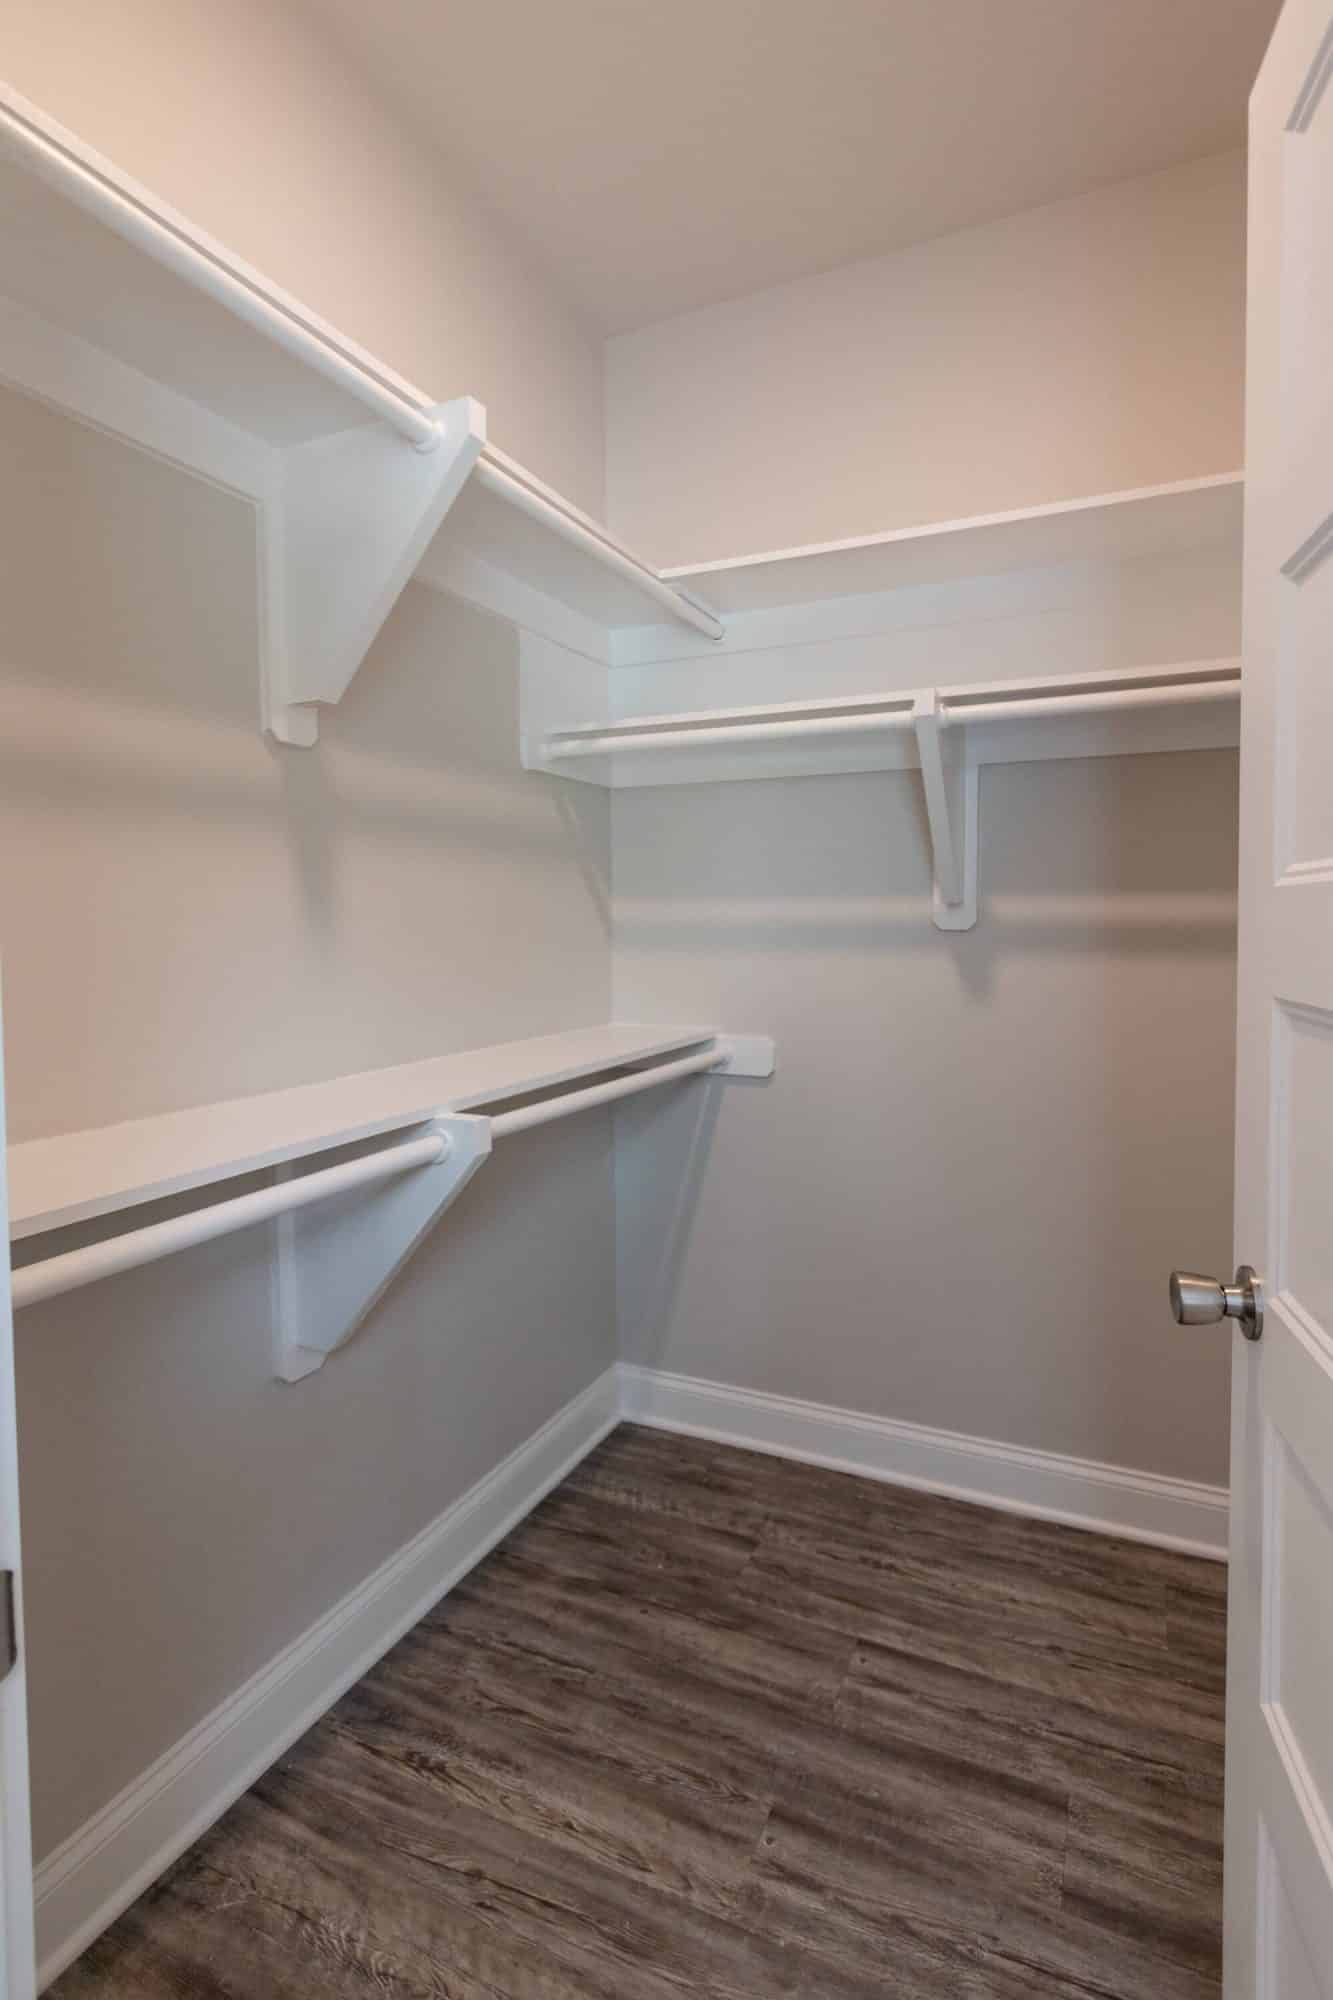 raleigh off campus apartments burt dr off campus apartments near nc state university walk in closet built in shelving